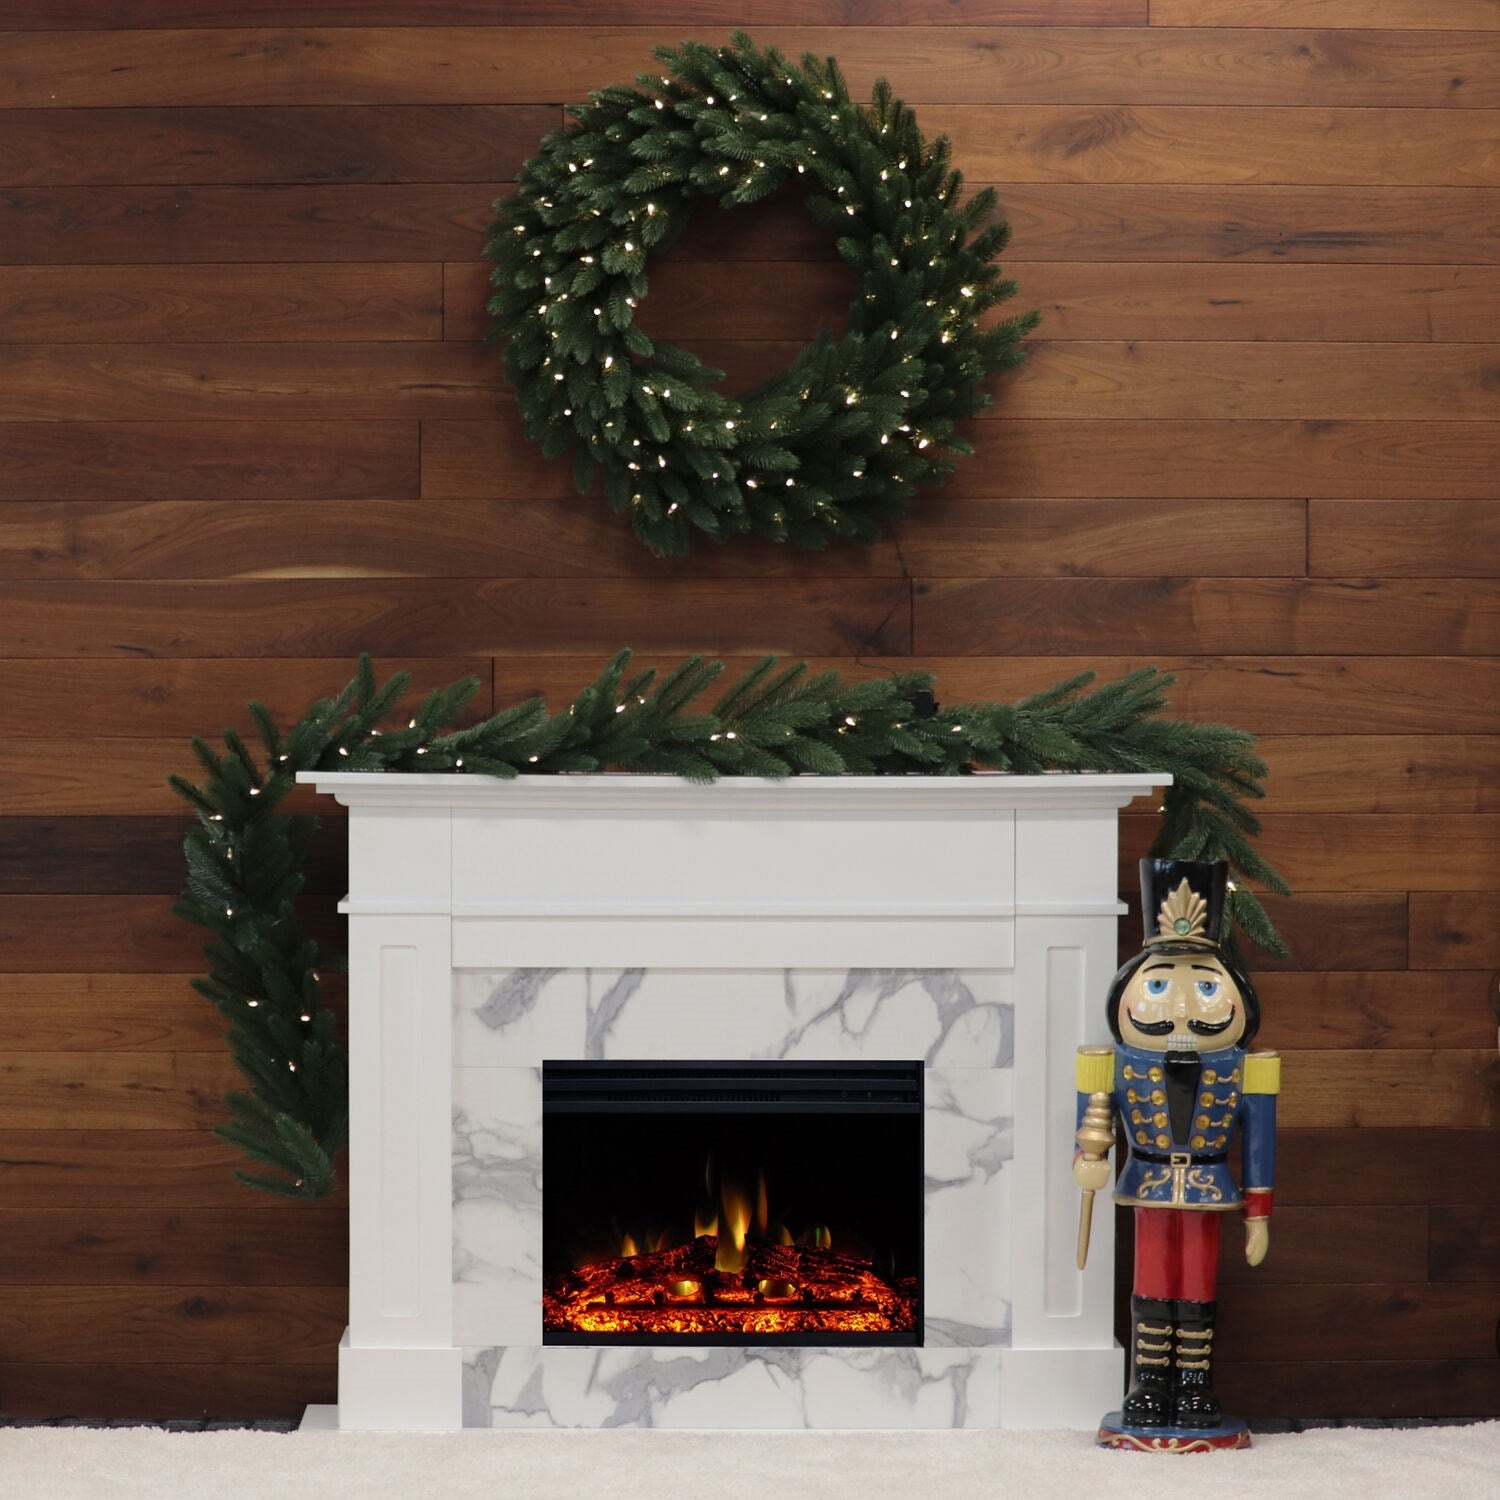 Cambridge - 53"x17.7"x13.4" Sofia Fireplace Mantel w/ Marble and Deep Log Insert - Electric Mantel Fireplaces - CAM5617-1WHTLG3